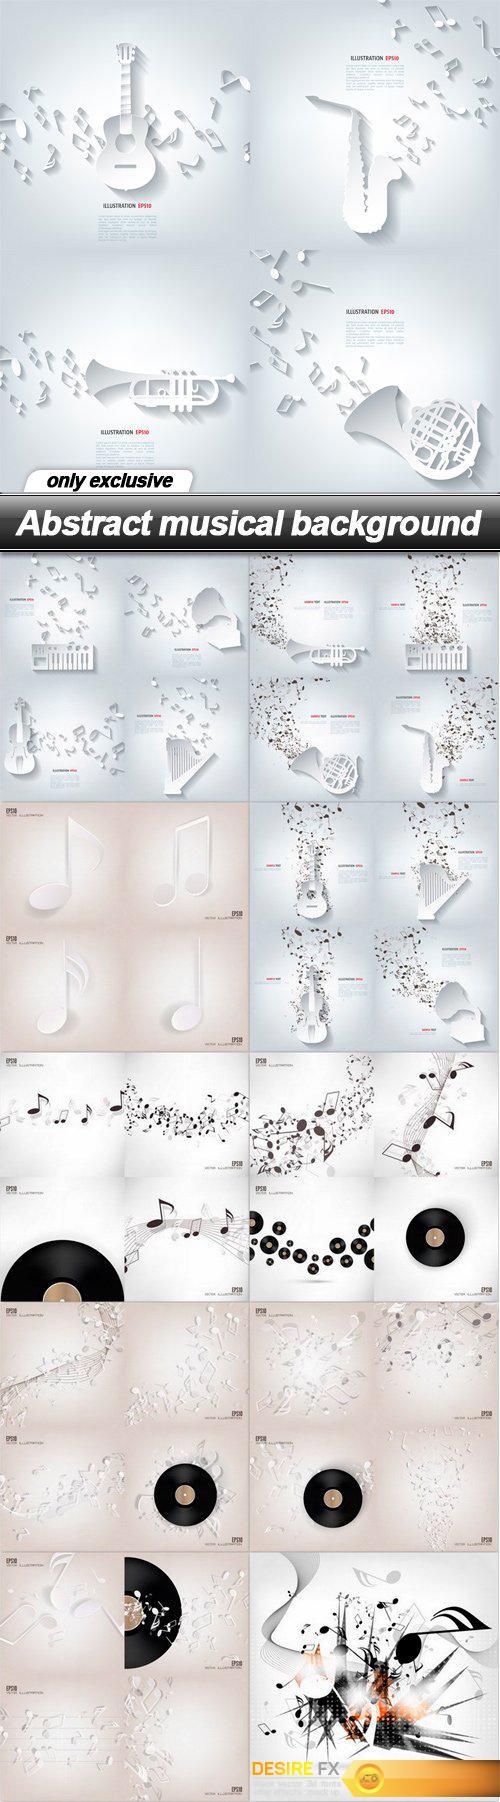 Abstract musical background - 11 EPS